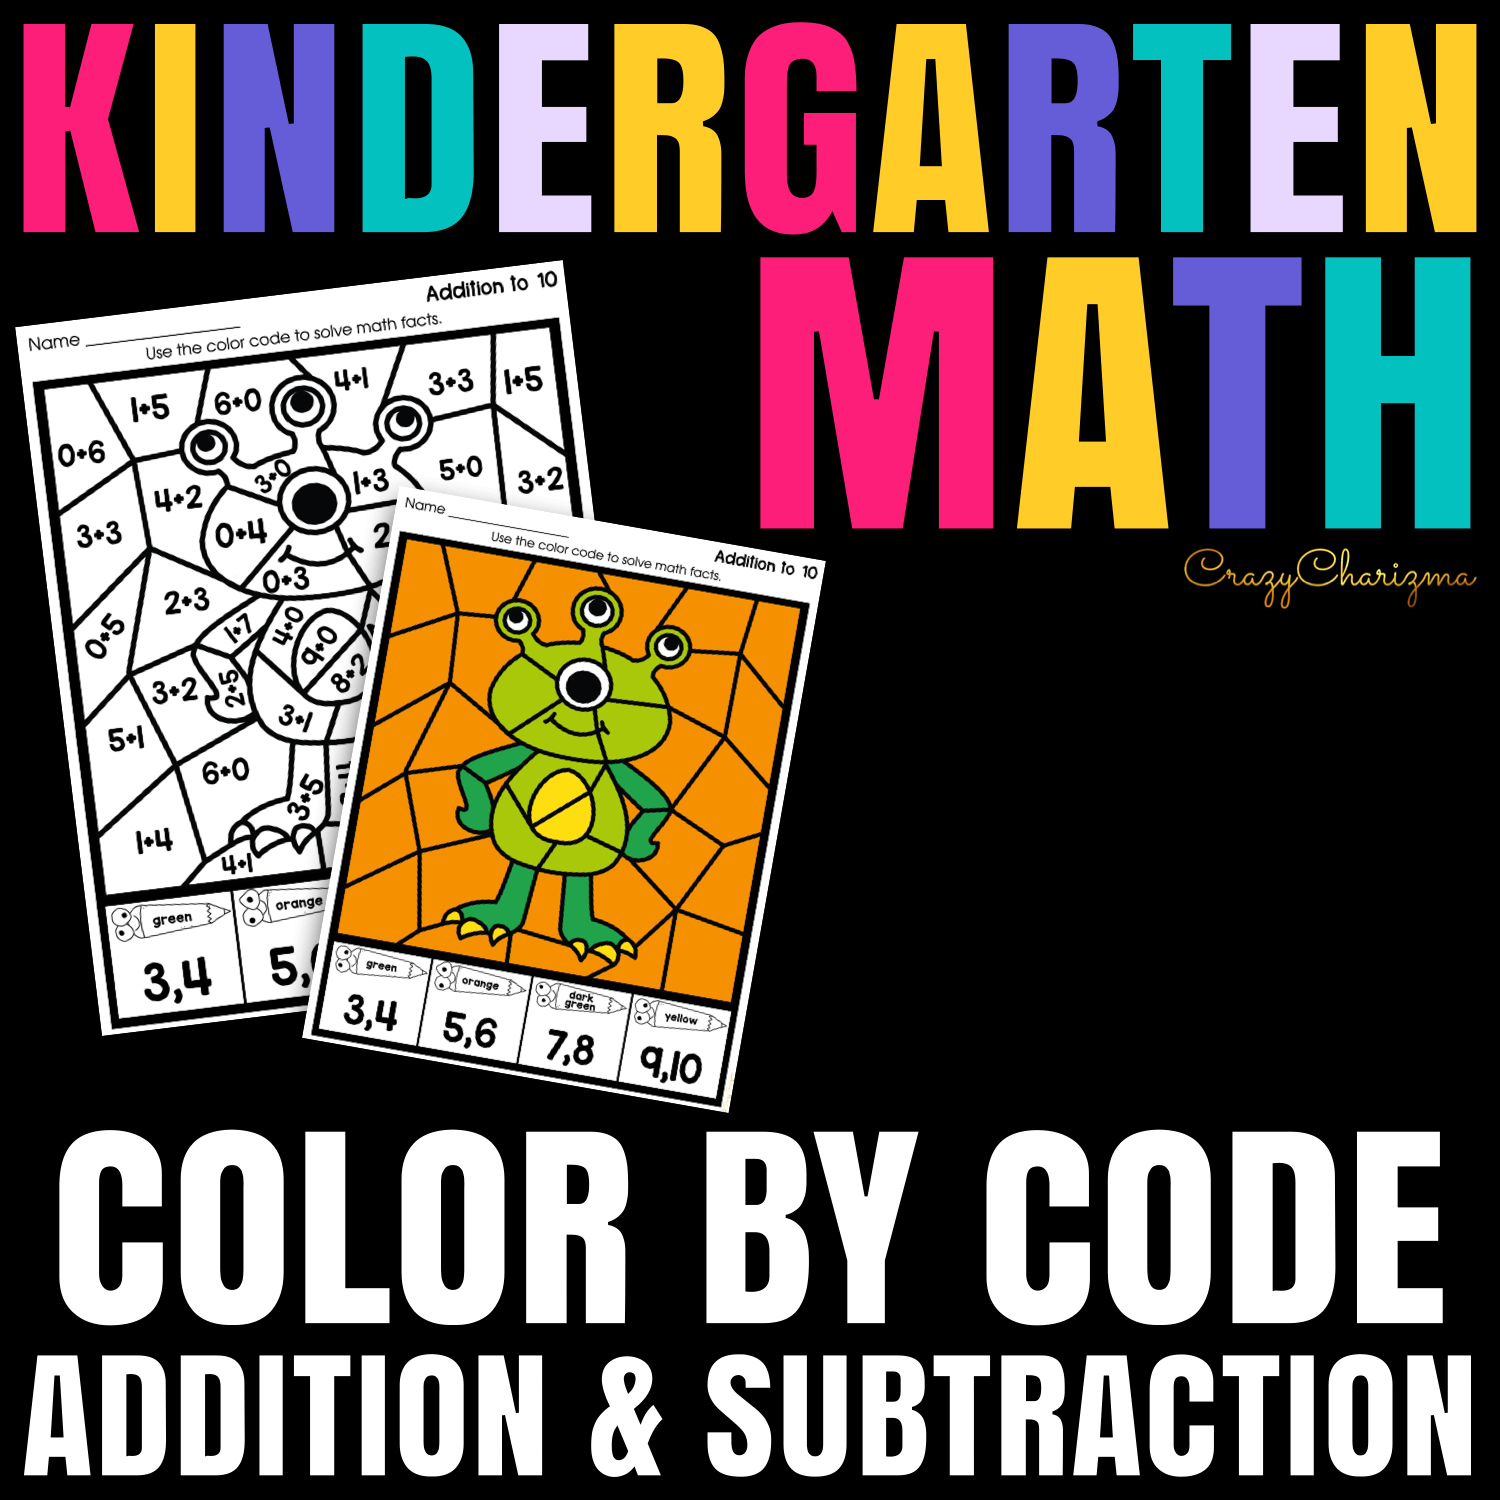 Practice addition and subtraction to 10 with color by code worksheets, kids love them a lot! Find inside 10 projects: 5 to practice addition to 10 and 5 - to practice subtraction within 10!